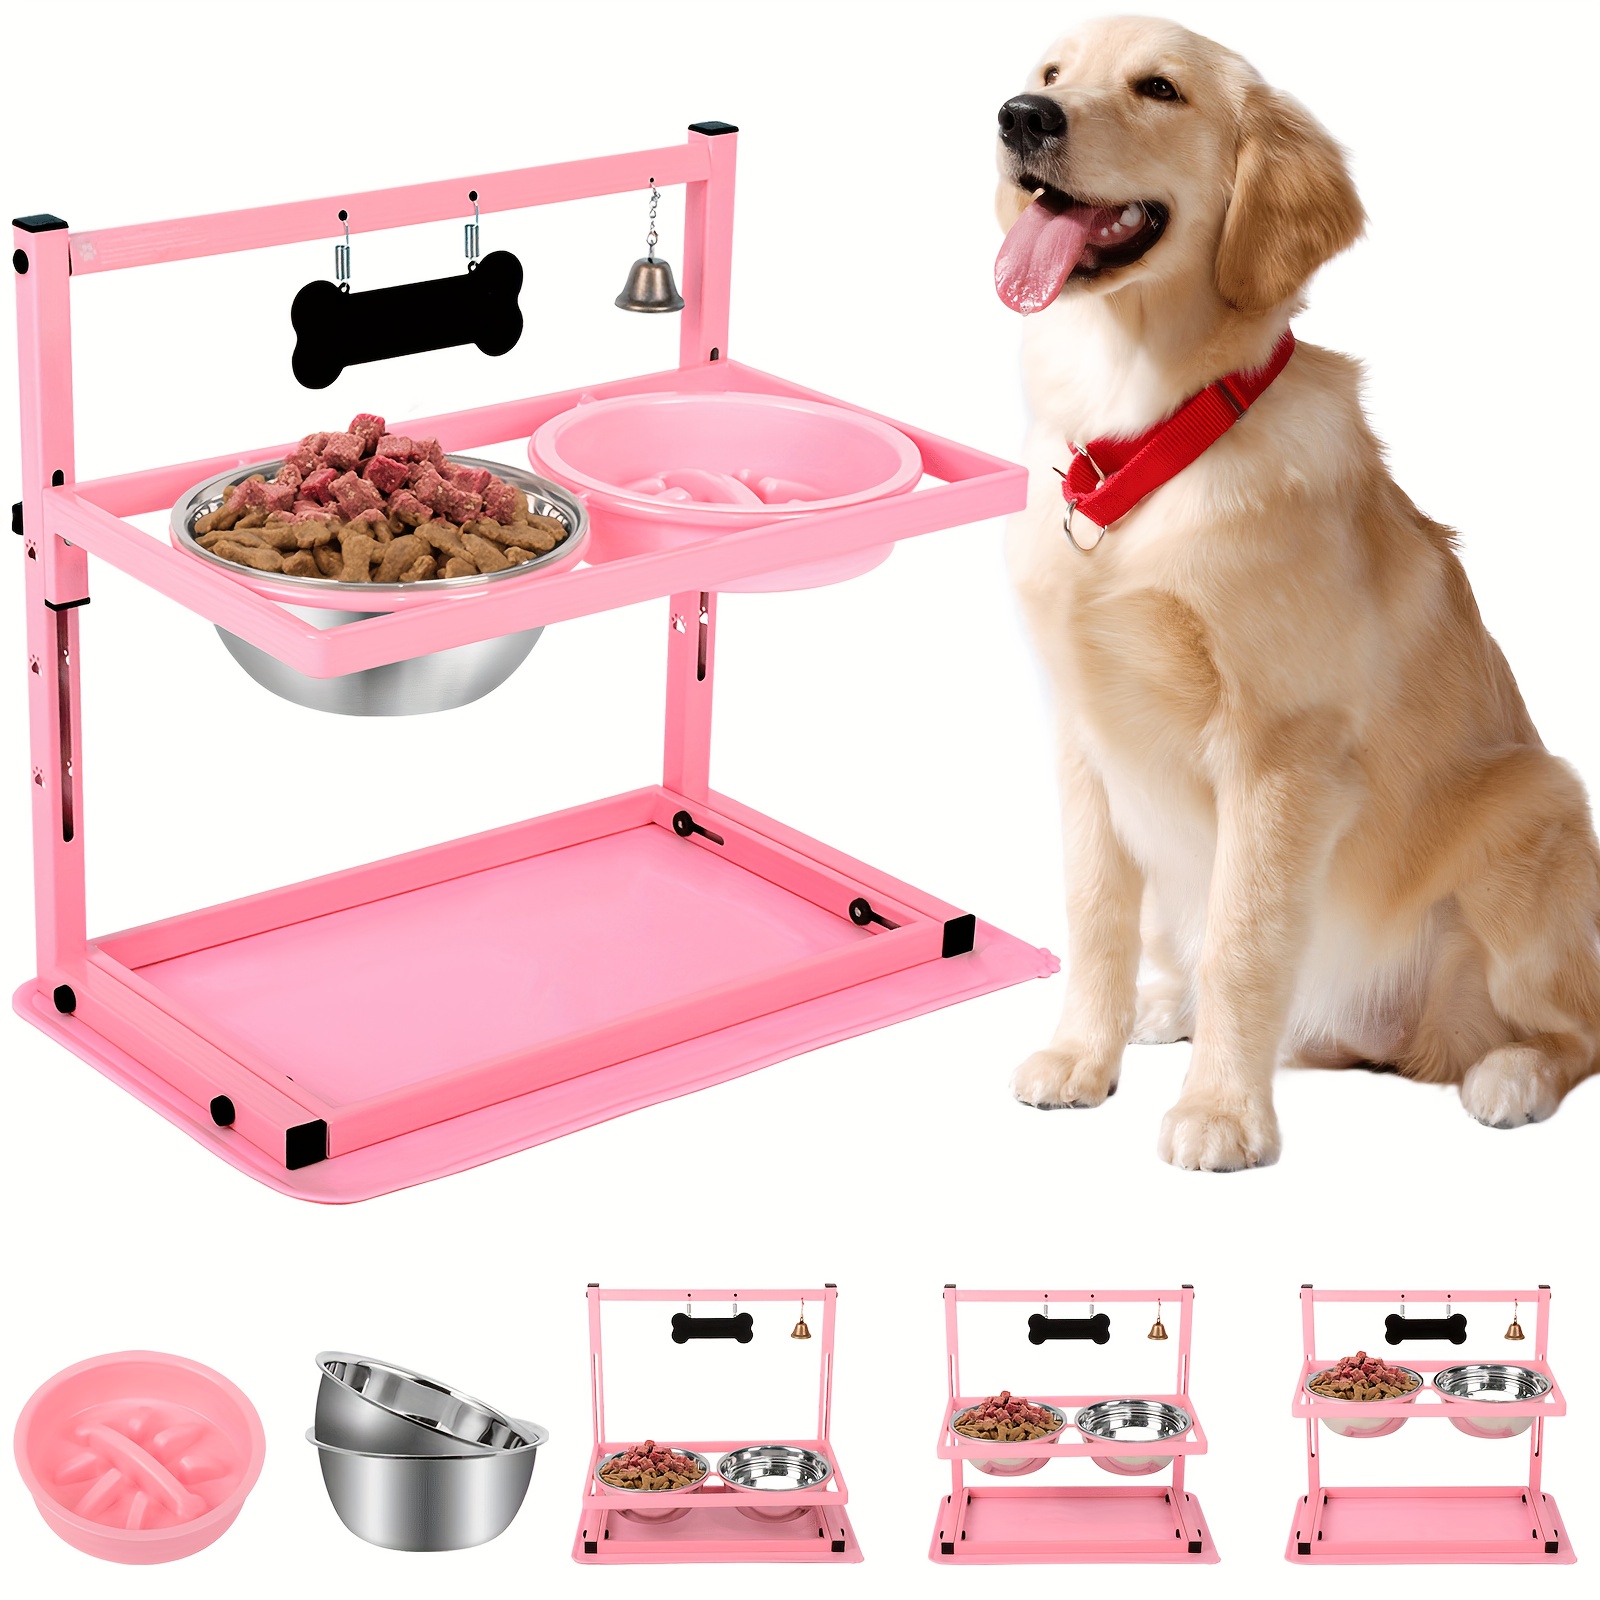 

Adjustable Raised Dog Bowl Stand With 2 1700ml Stainless Steel Food Bowls, A Slow Dog Feeder And A Silicone Food Mat, Pink Dog Feeder, Elevated Dog Bowl For Large Medium And Small Dogs